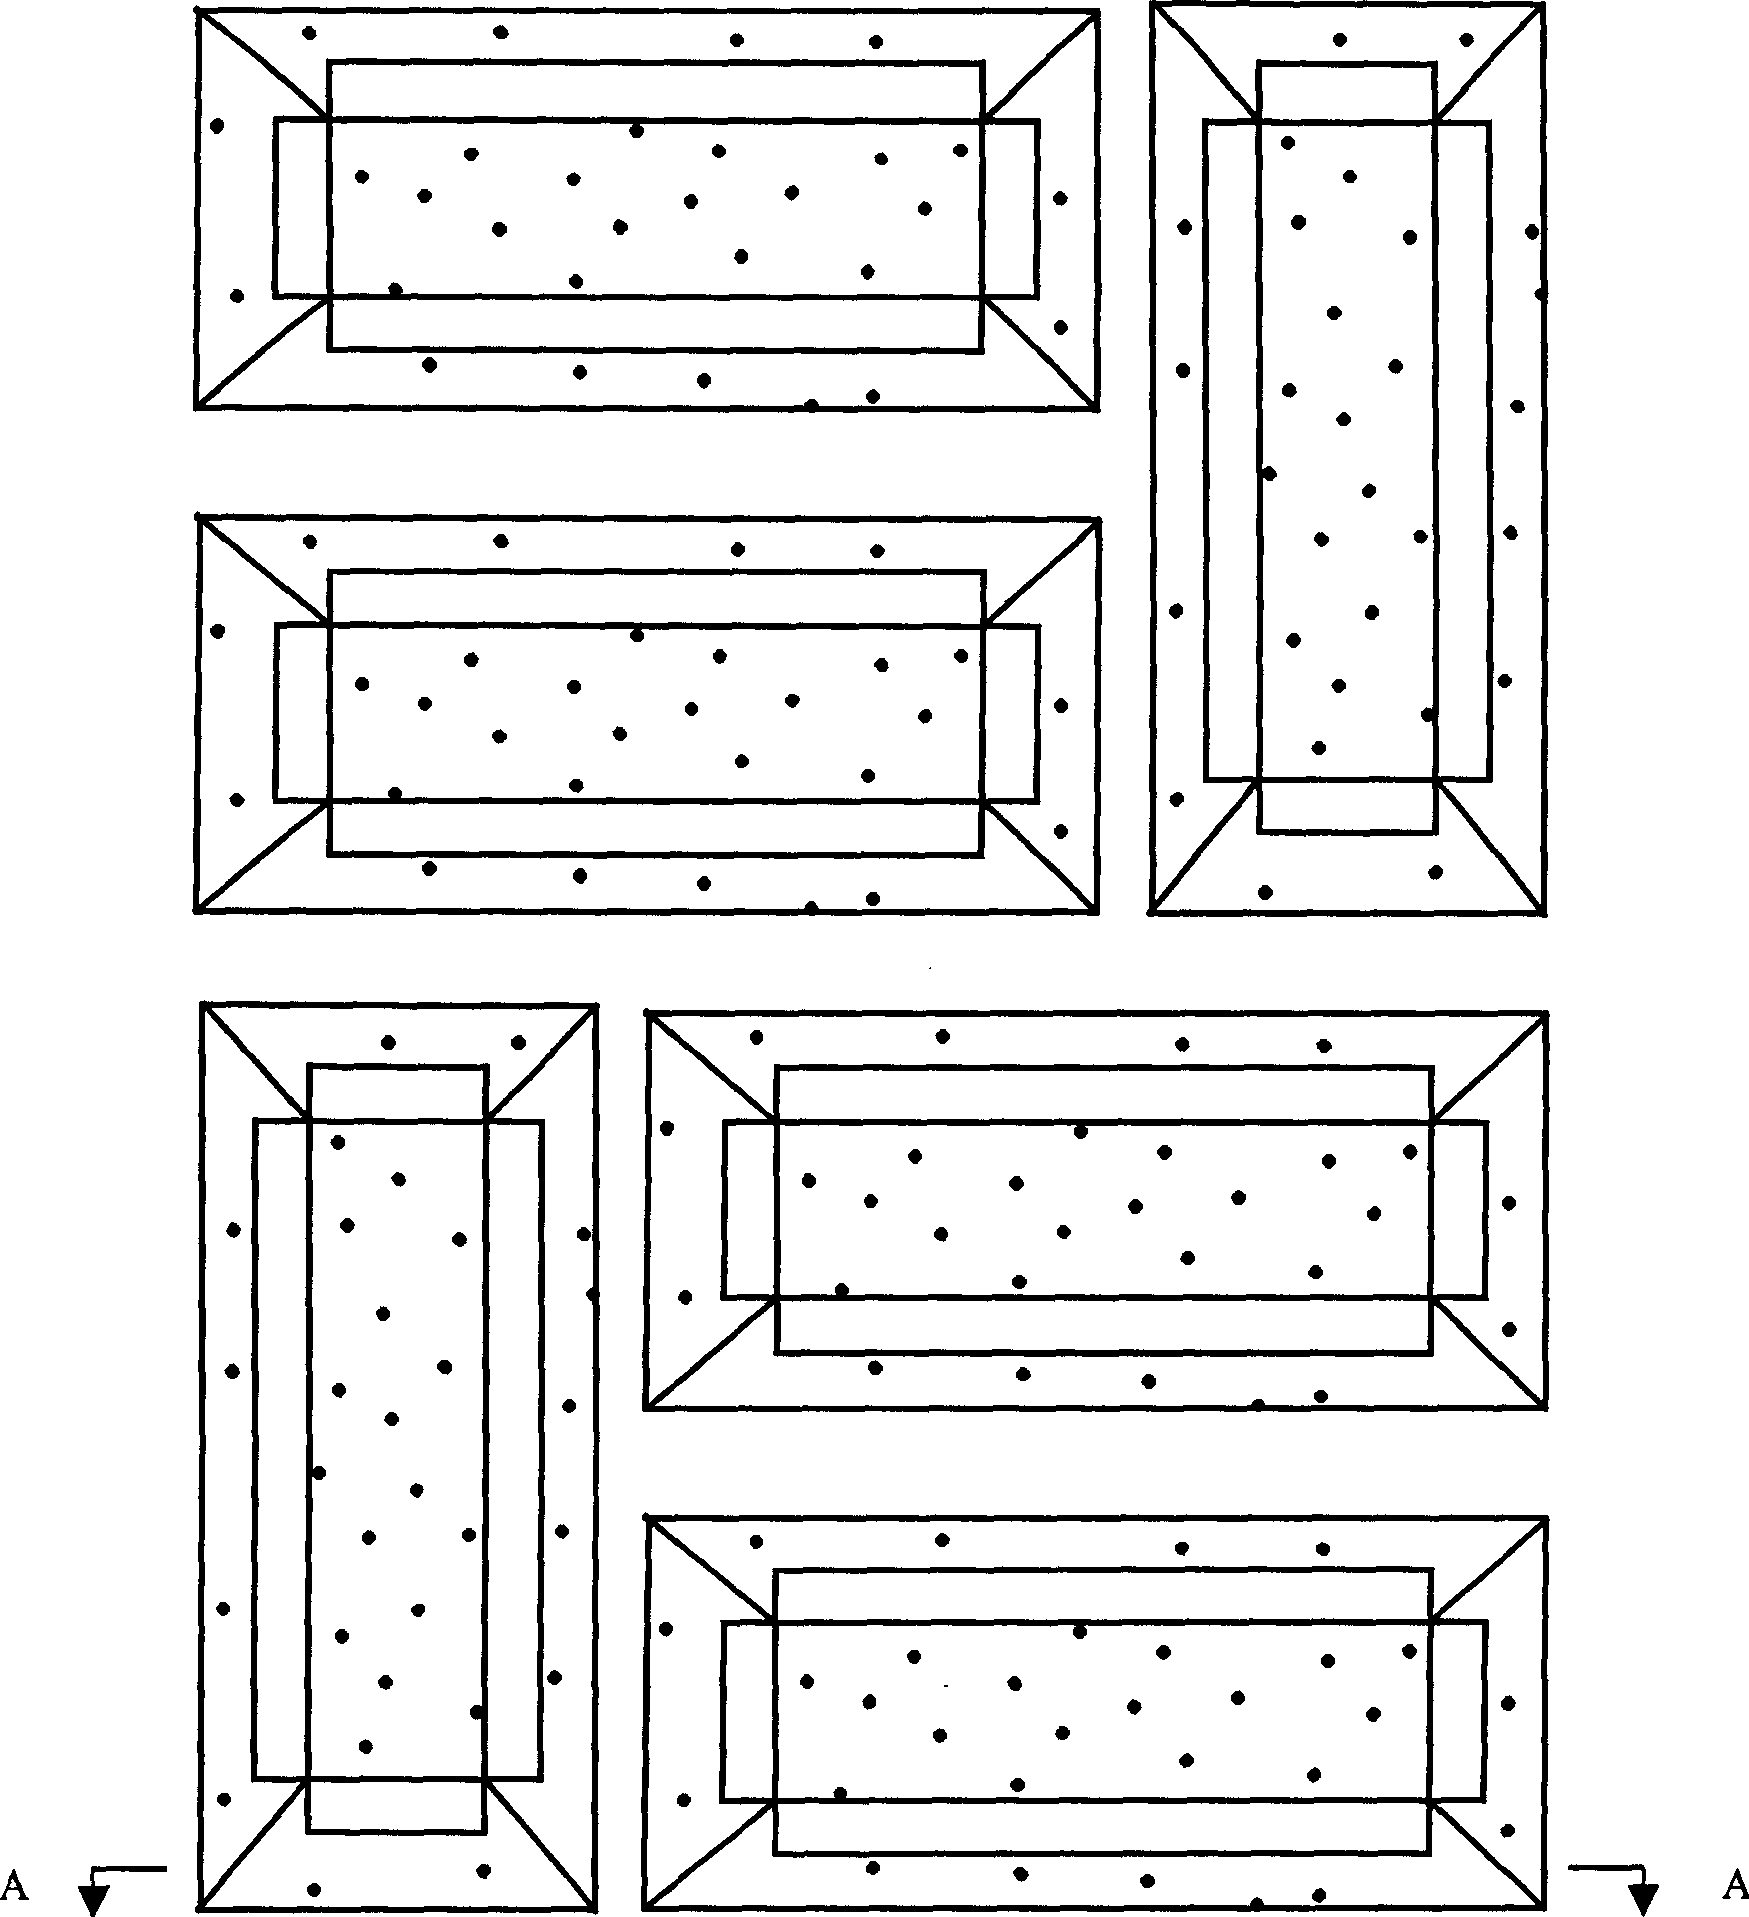 Road ceramic marking line and ceramic piece and manufacturing method thereof